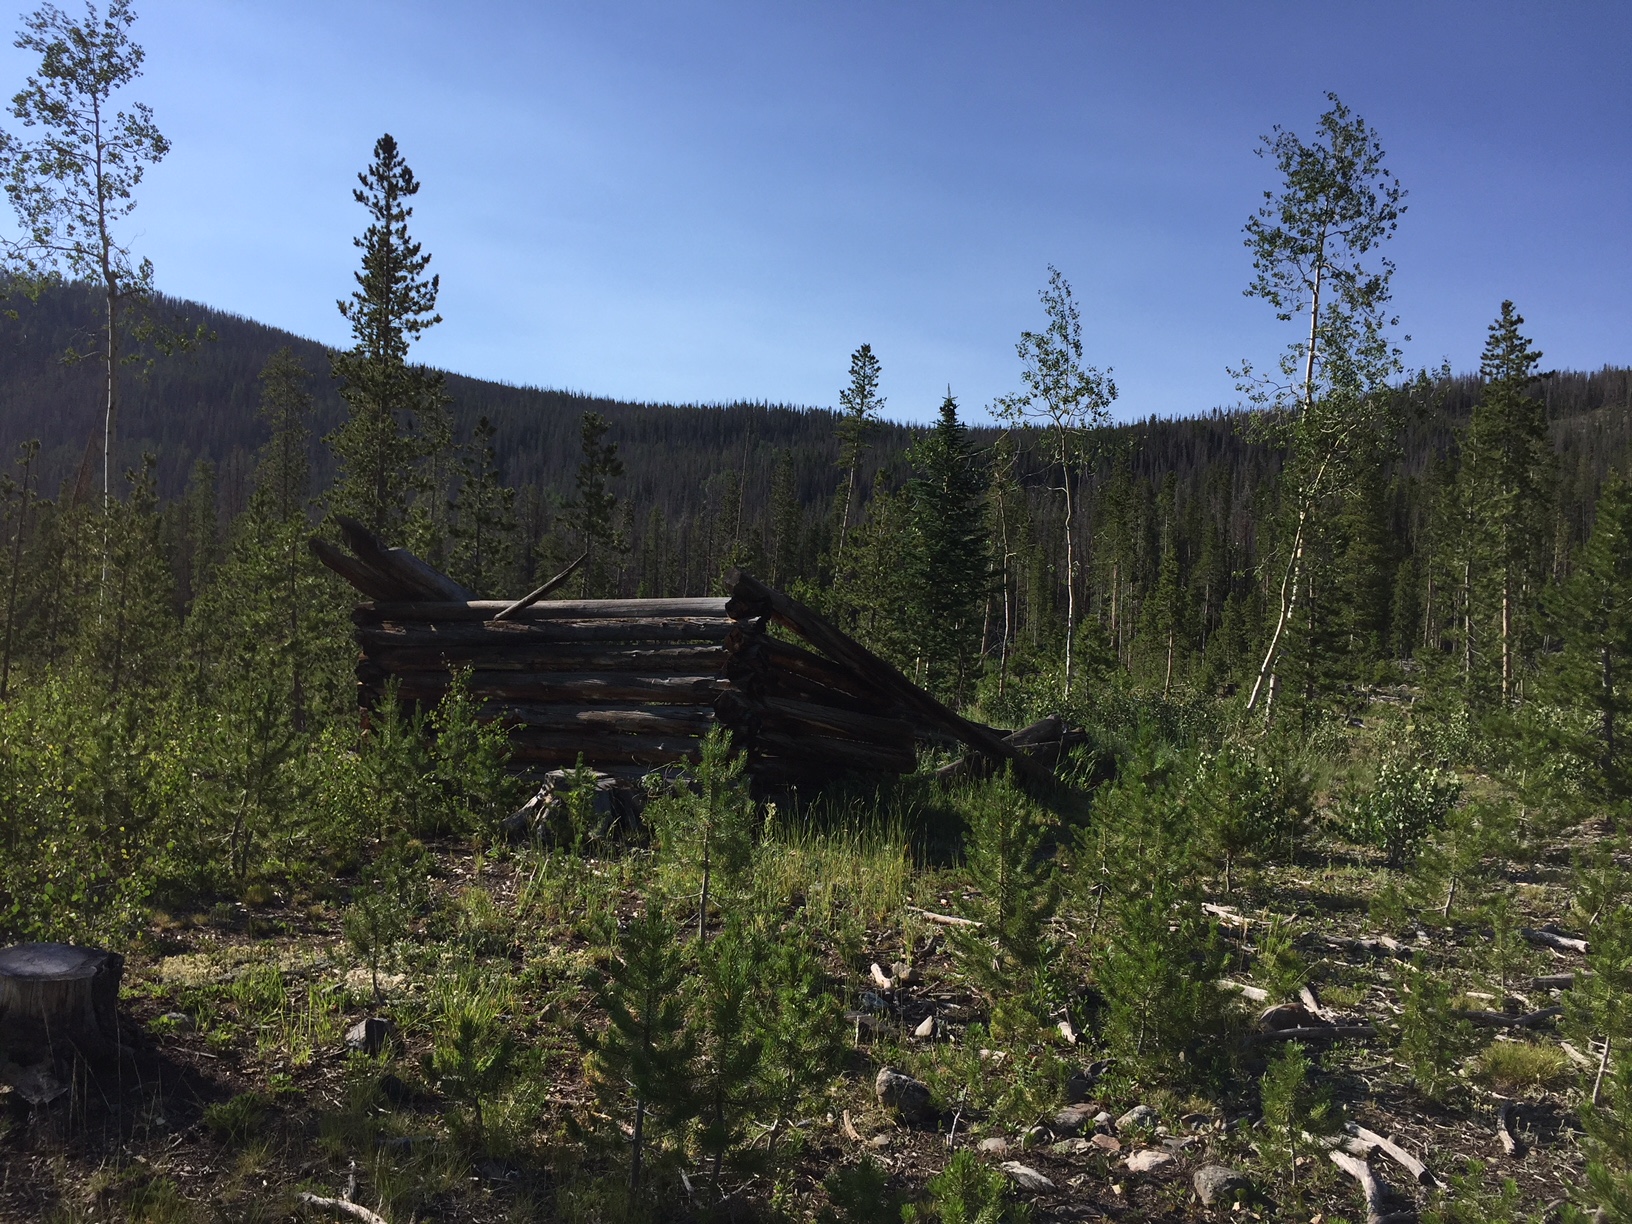 The ruins of an old cabin sits amongst small trees in an open space. Tree-covered mountains are in the background.